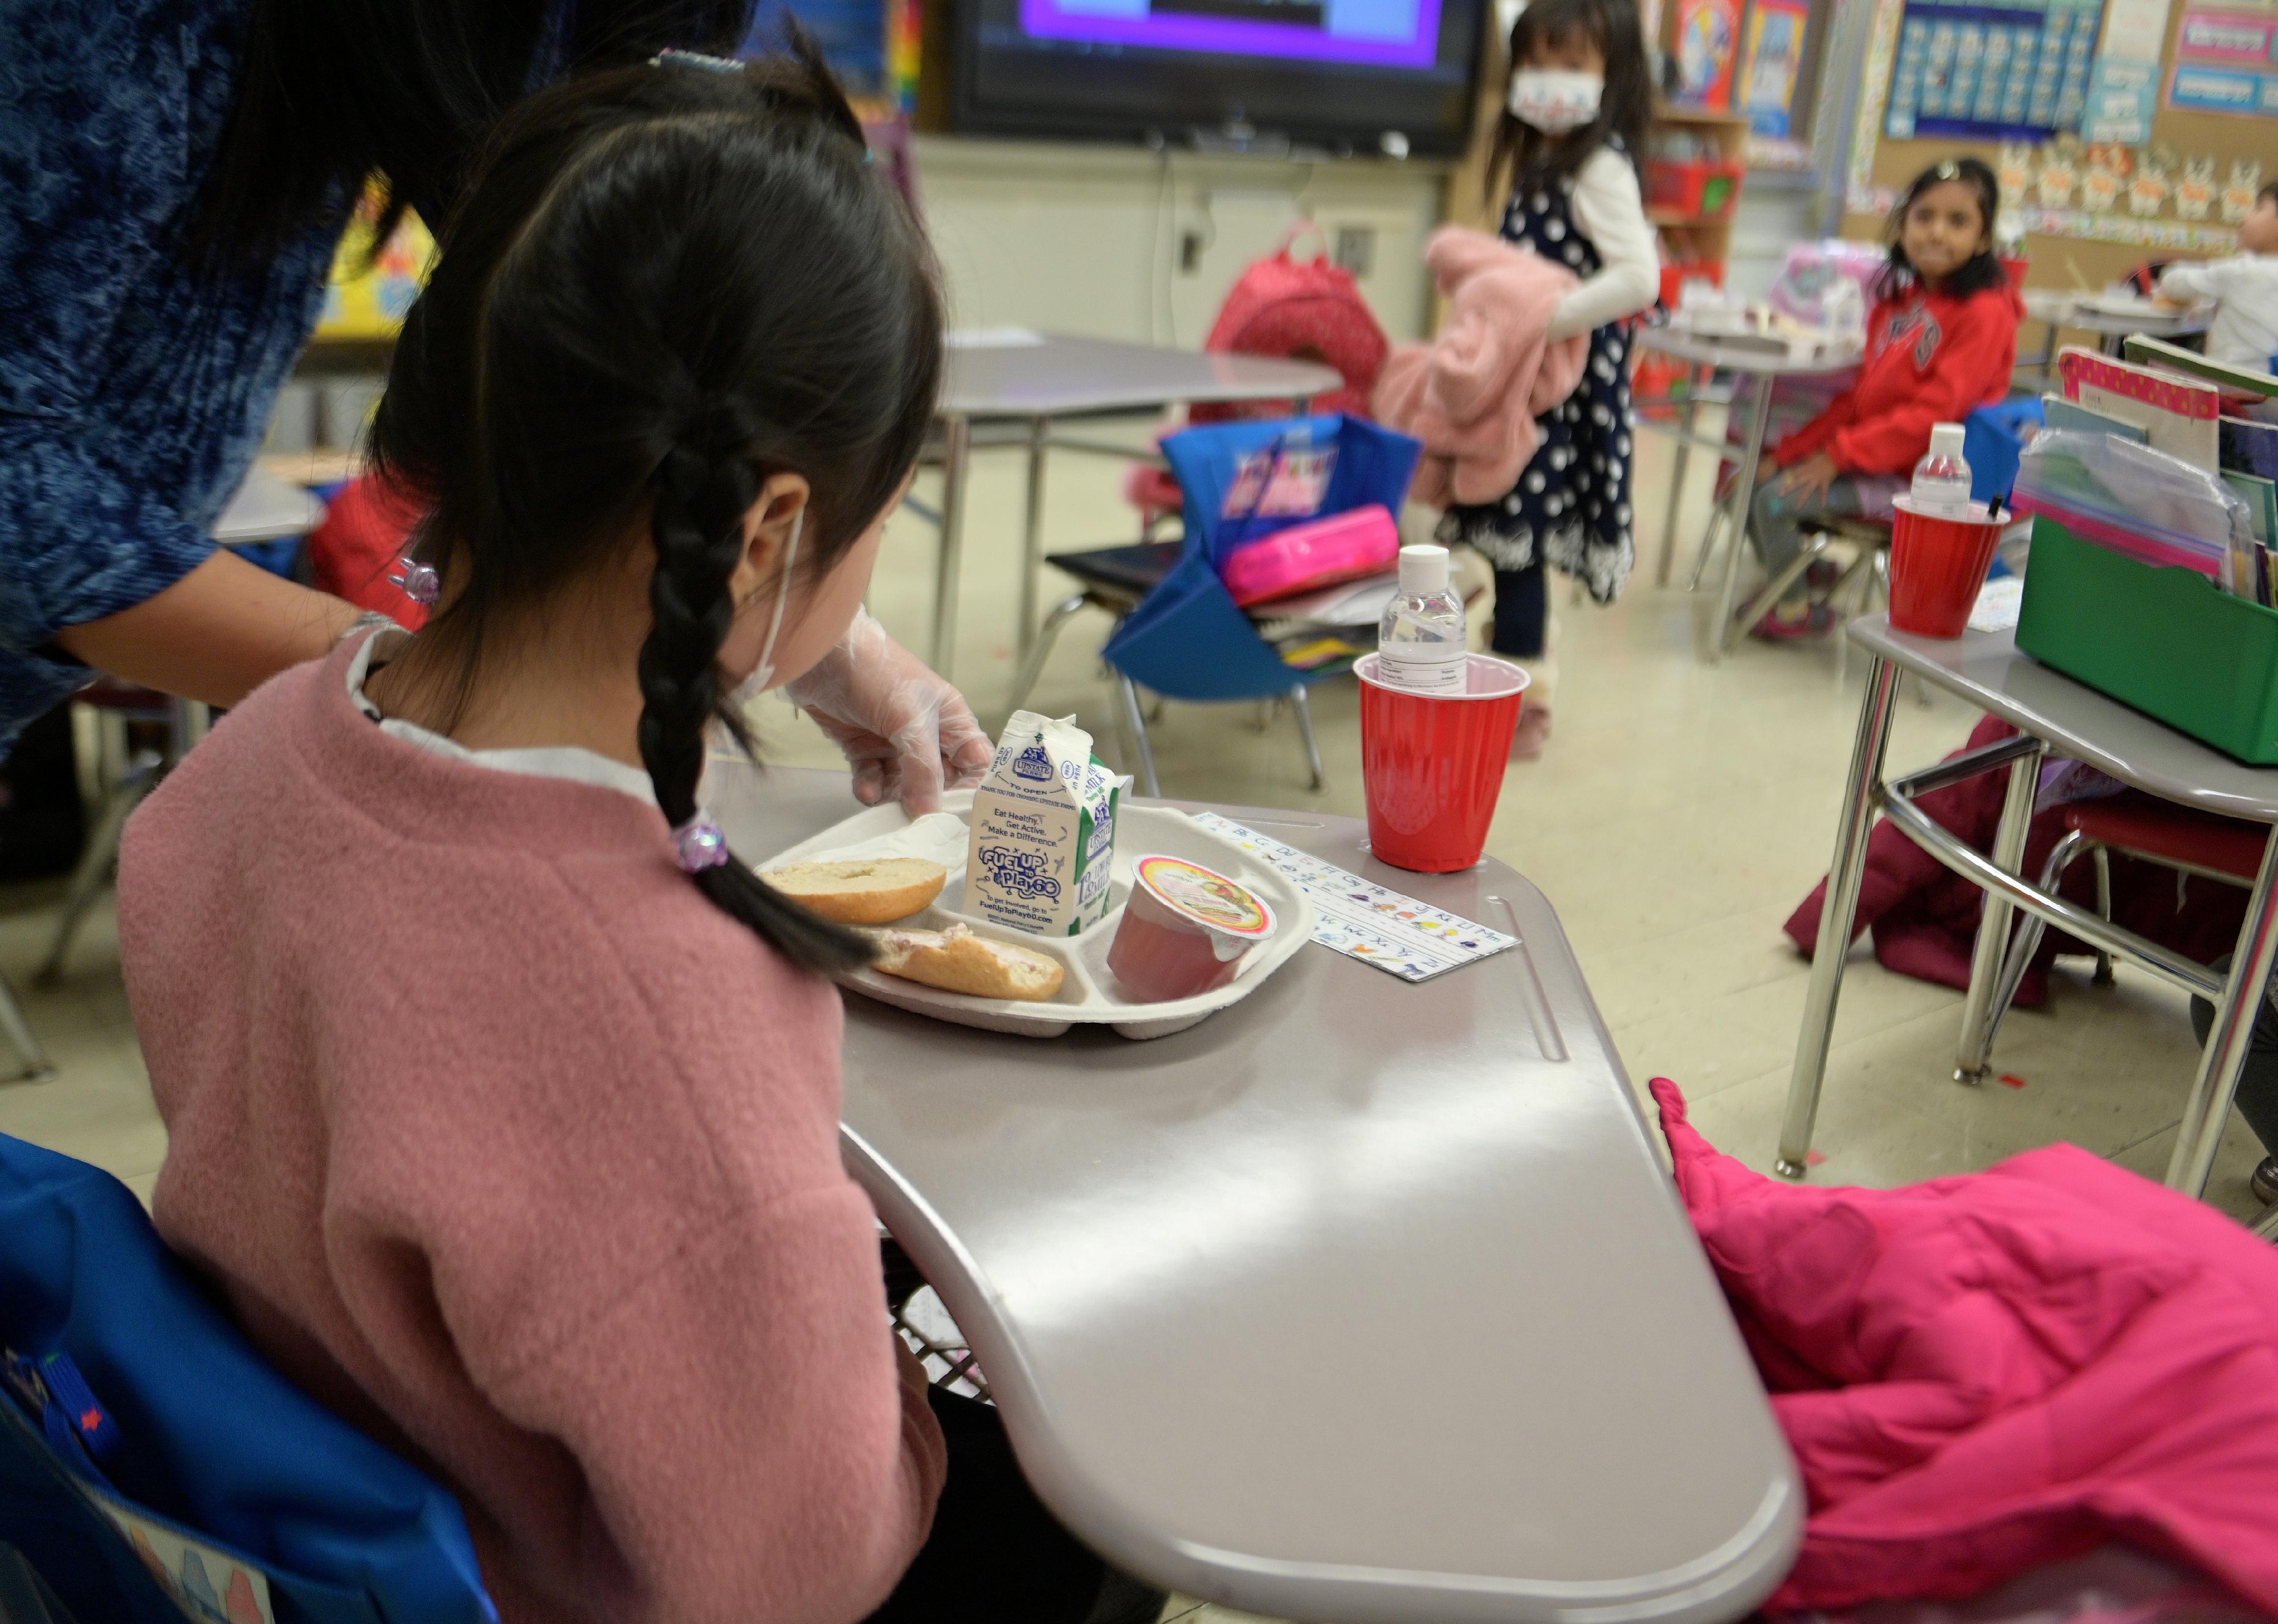 A kindergarten girl being served a lunch tray